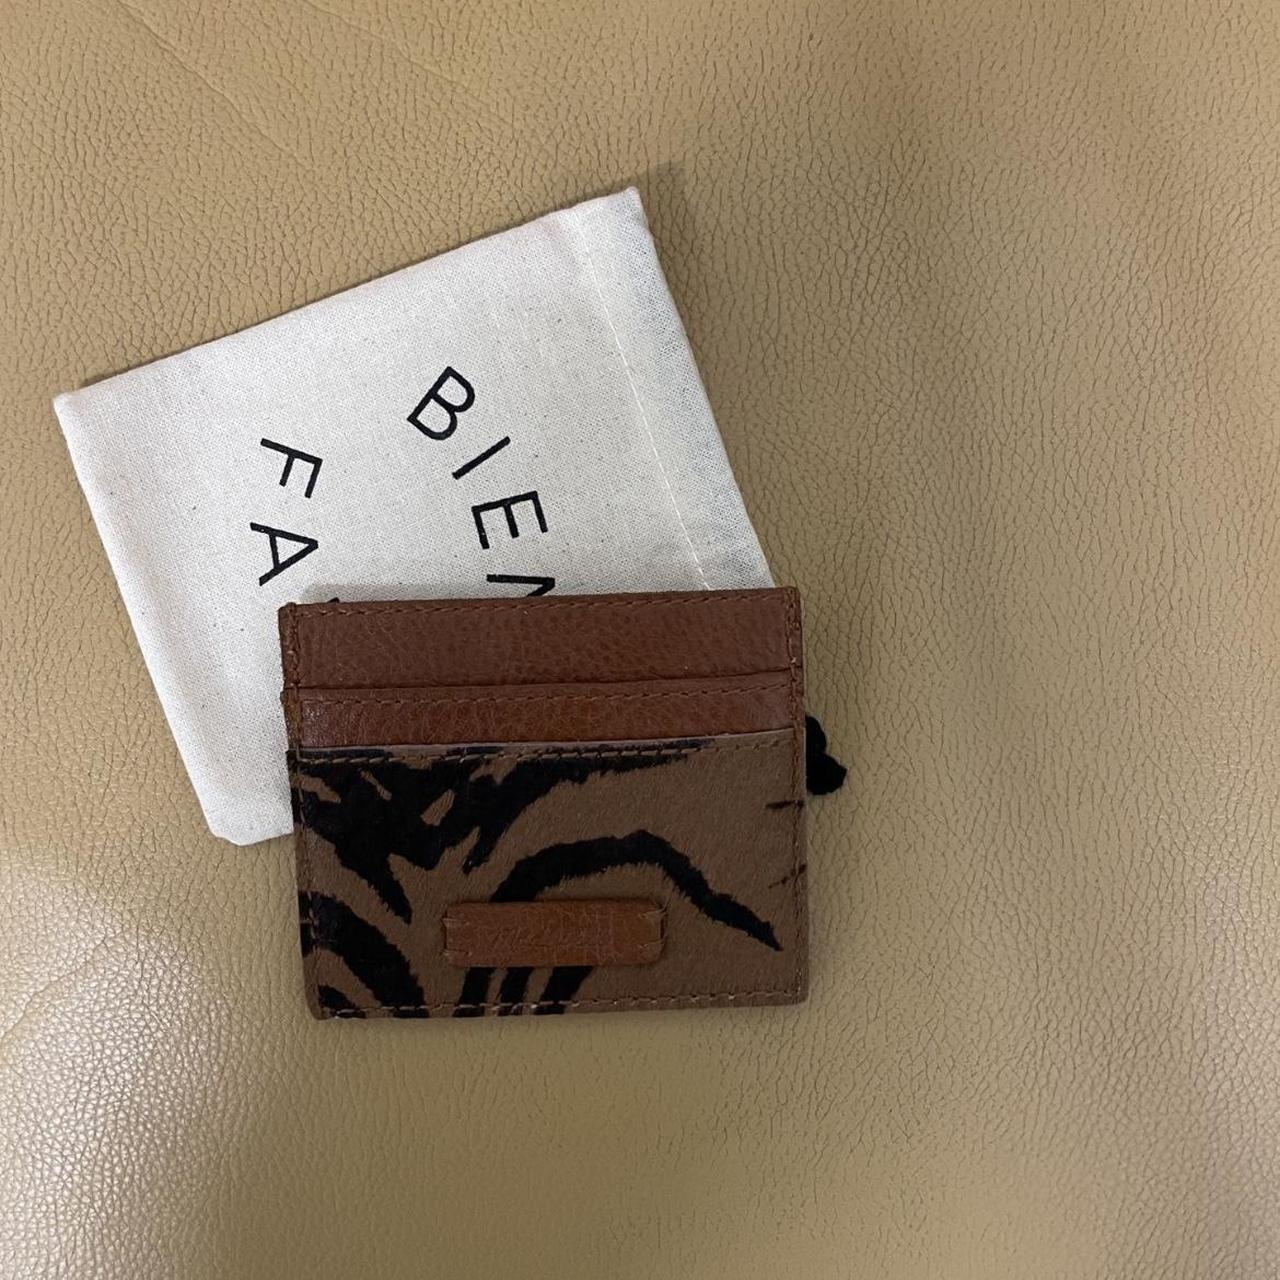 Used burberry leather card holder - LEATHER